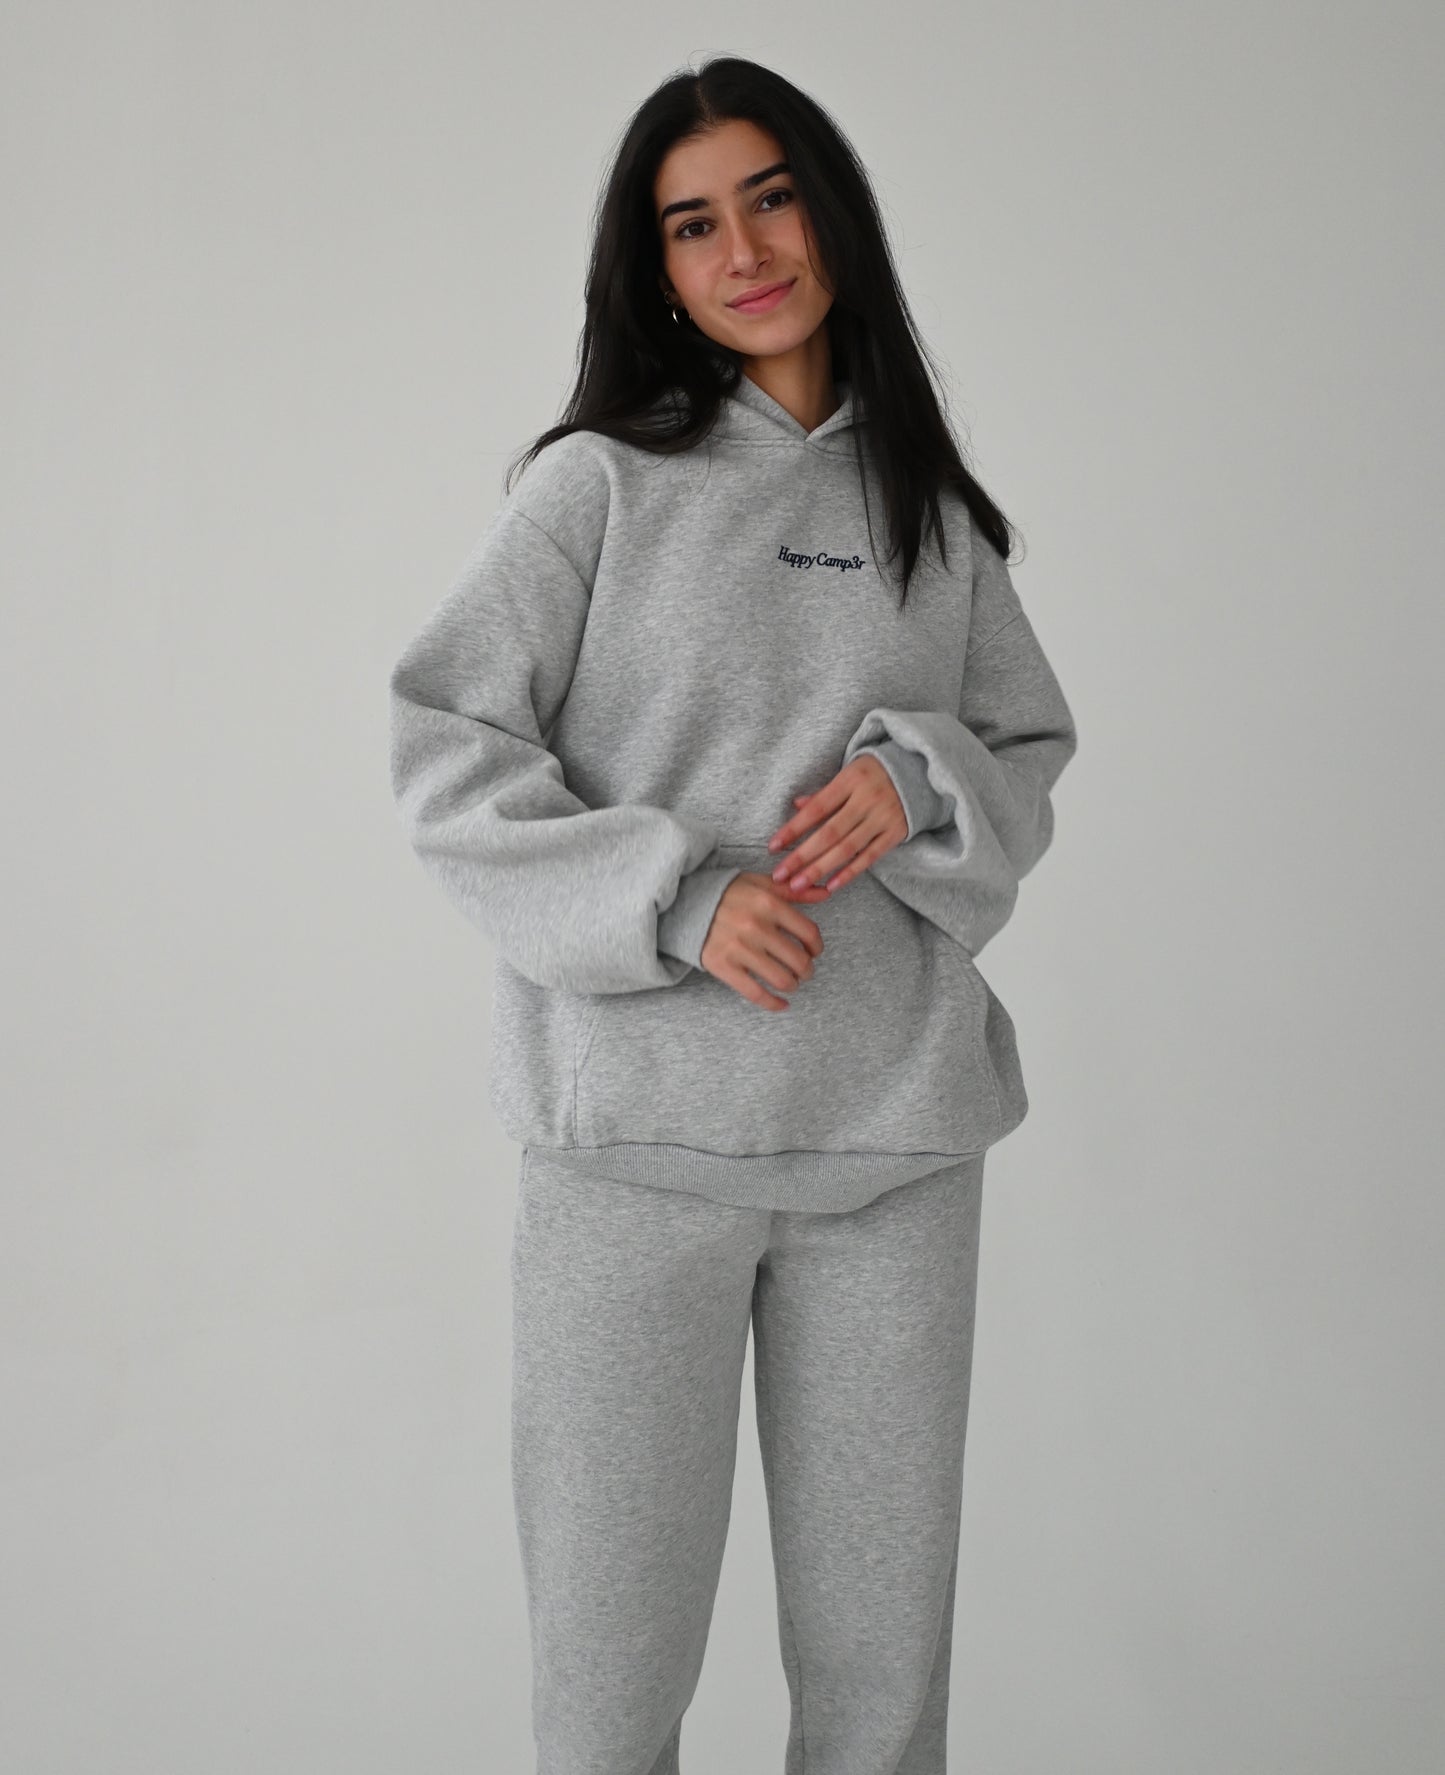 Destined for Greatness Sweatpants - Heather Gray